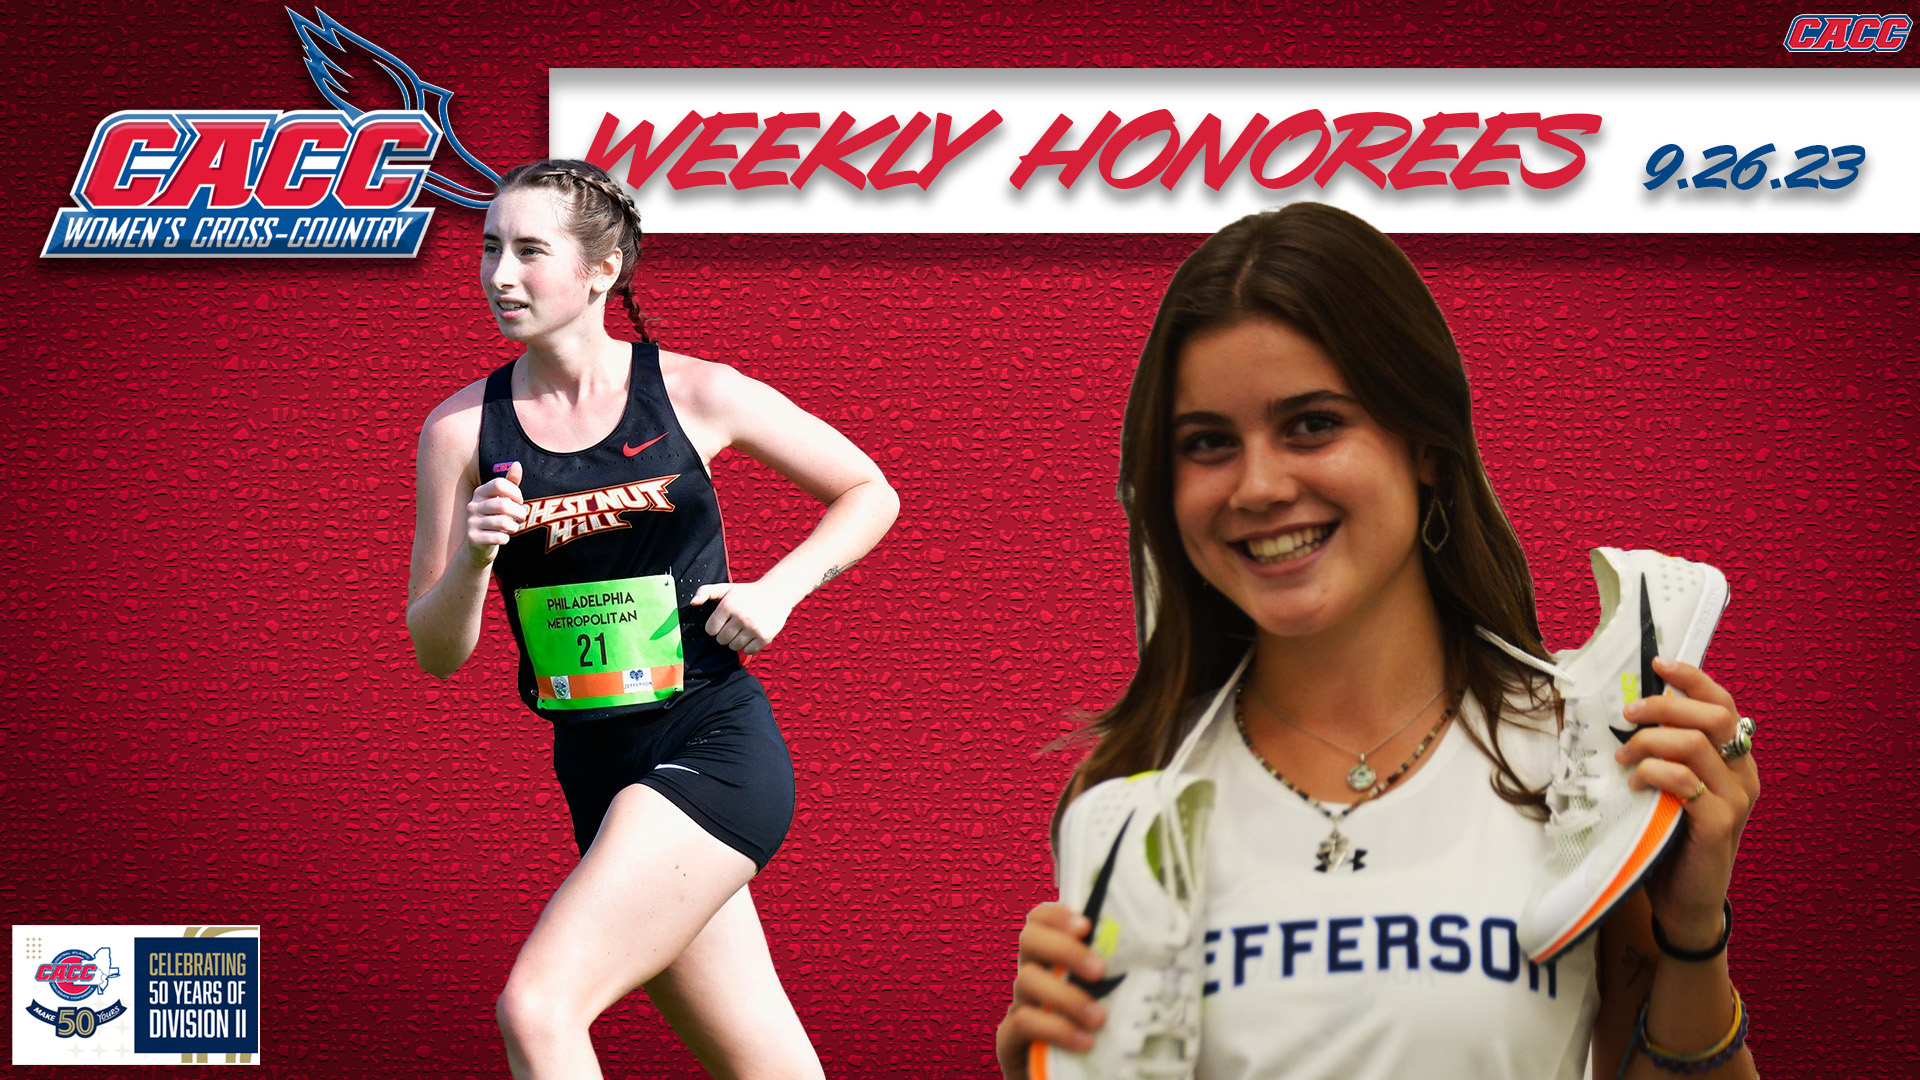 CACC Women's Cross Country Weekly Honorees (9-26-23)